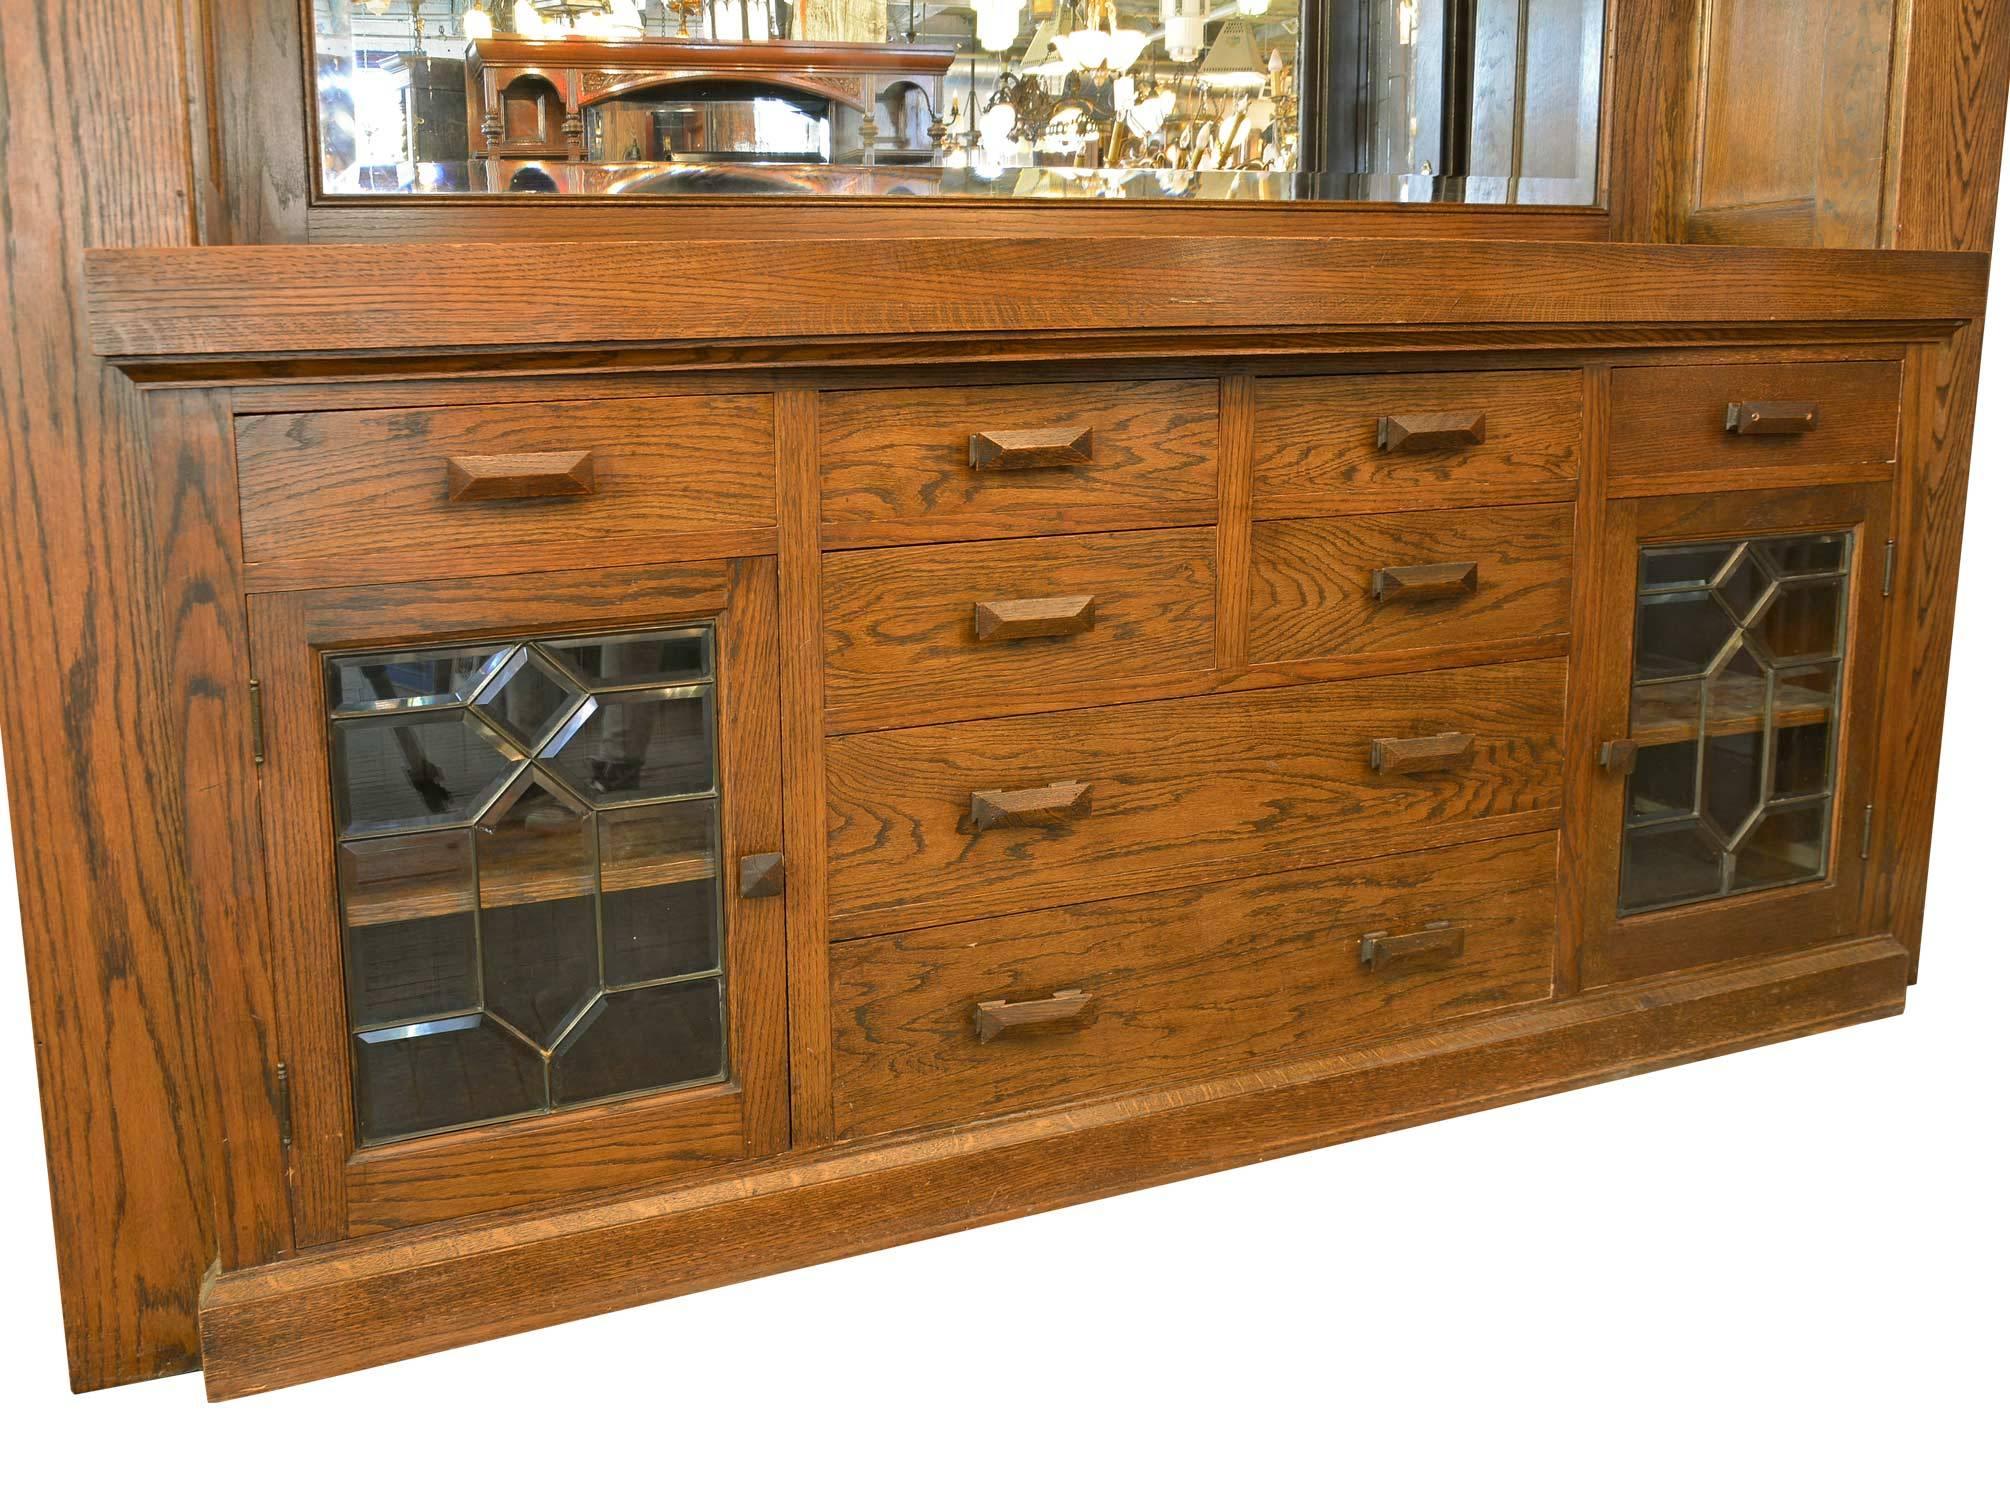 Built-in oak buffet with beveled mirror, leaded beveled windows on upper and lower cupboards, multiple drawers on bottom, and brass single-arm Sheffield sconces with art glass shades. Original oak finish and craftsman pulls. 
This unit is a built